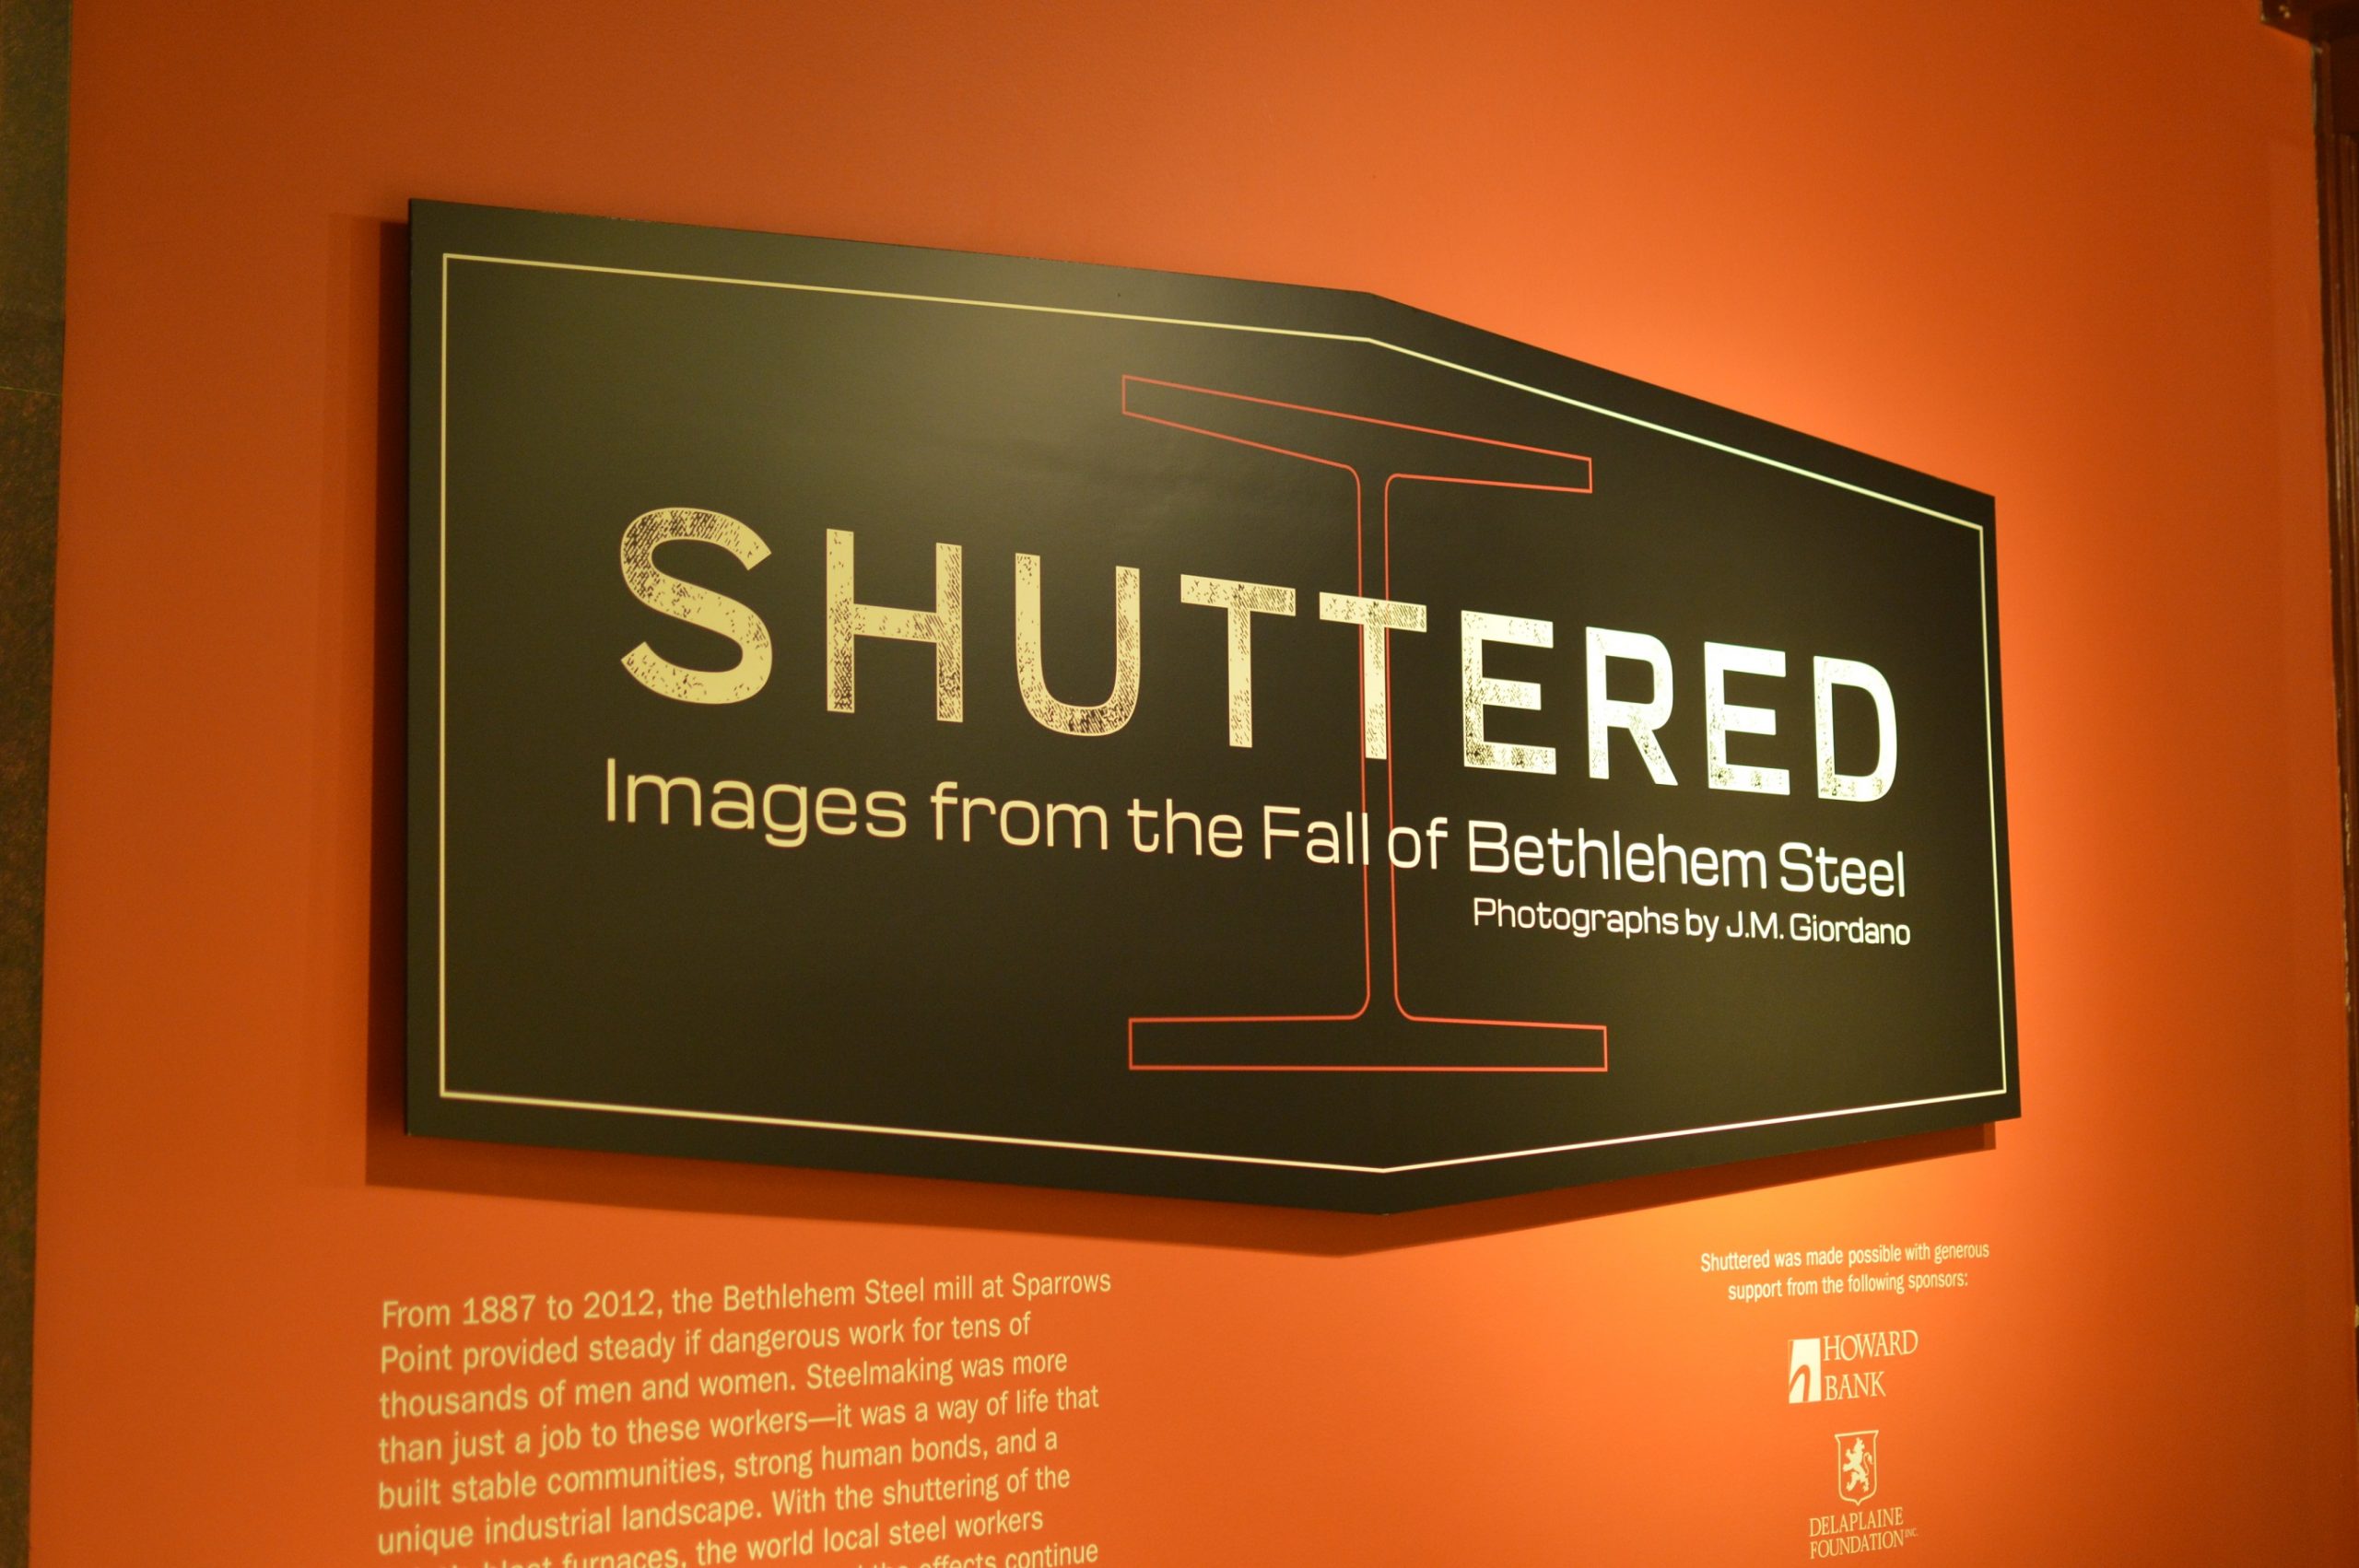 Shuttered presented images from the Fall of Bethlehem Steel at the BMI (Baltimore Museum of Industry) credit Anthony C. Hayes